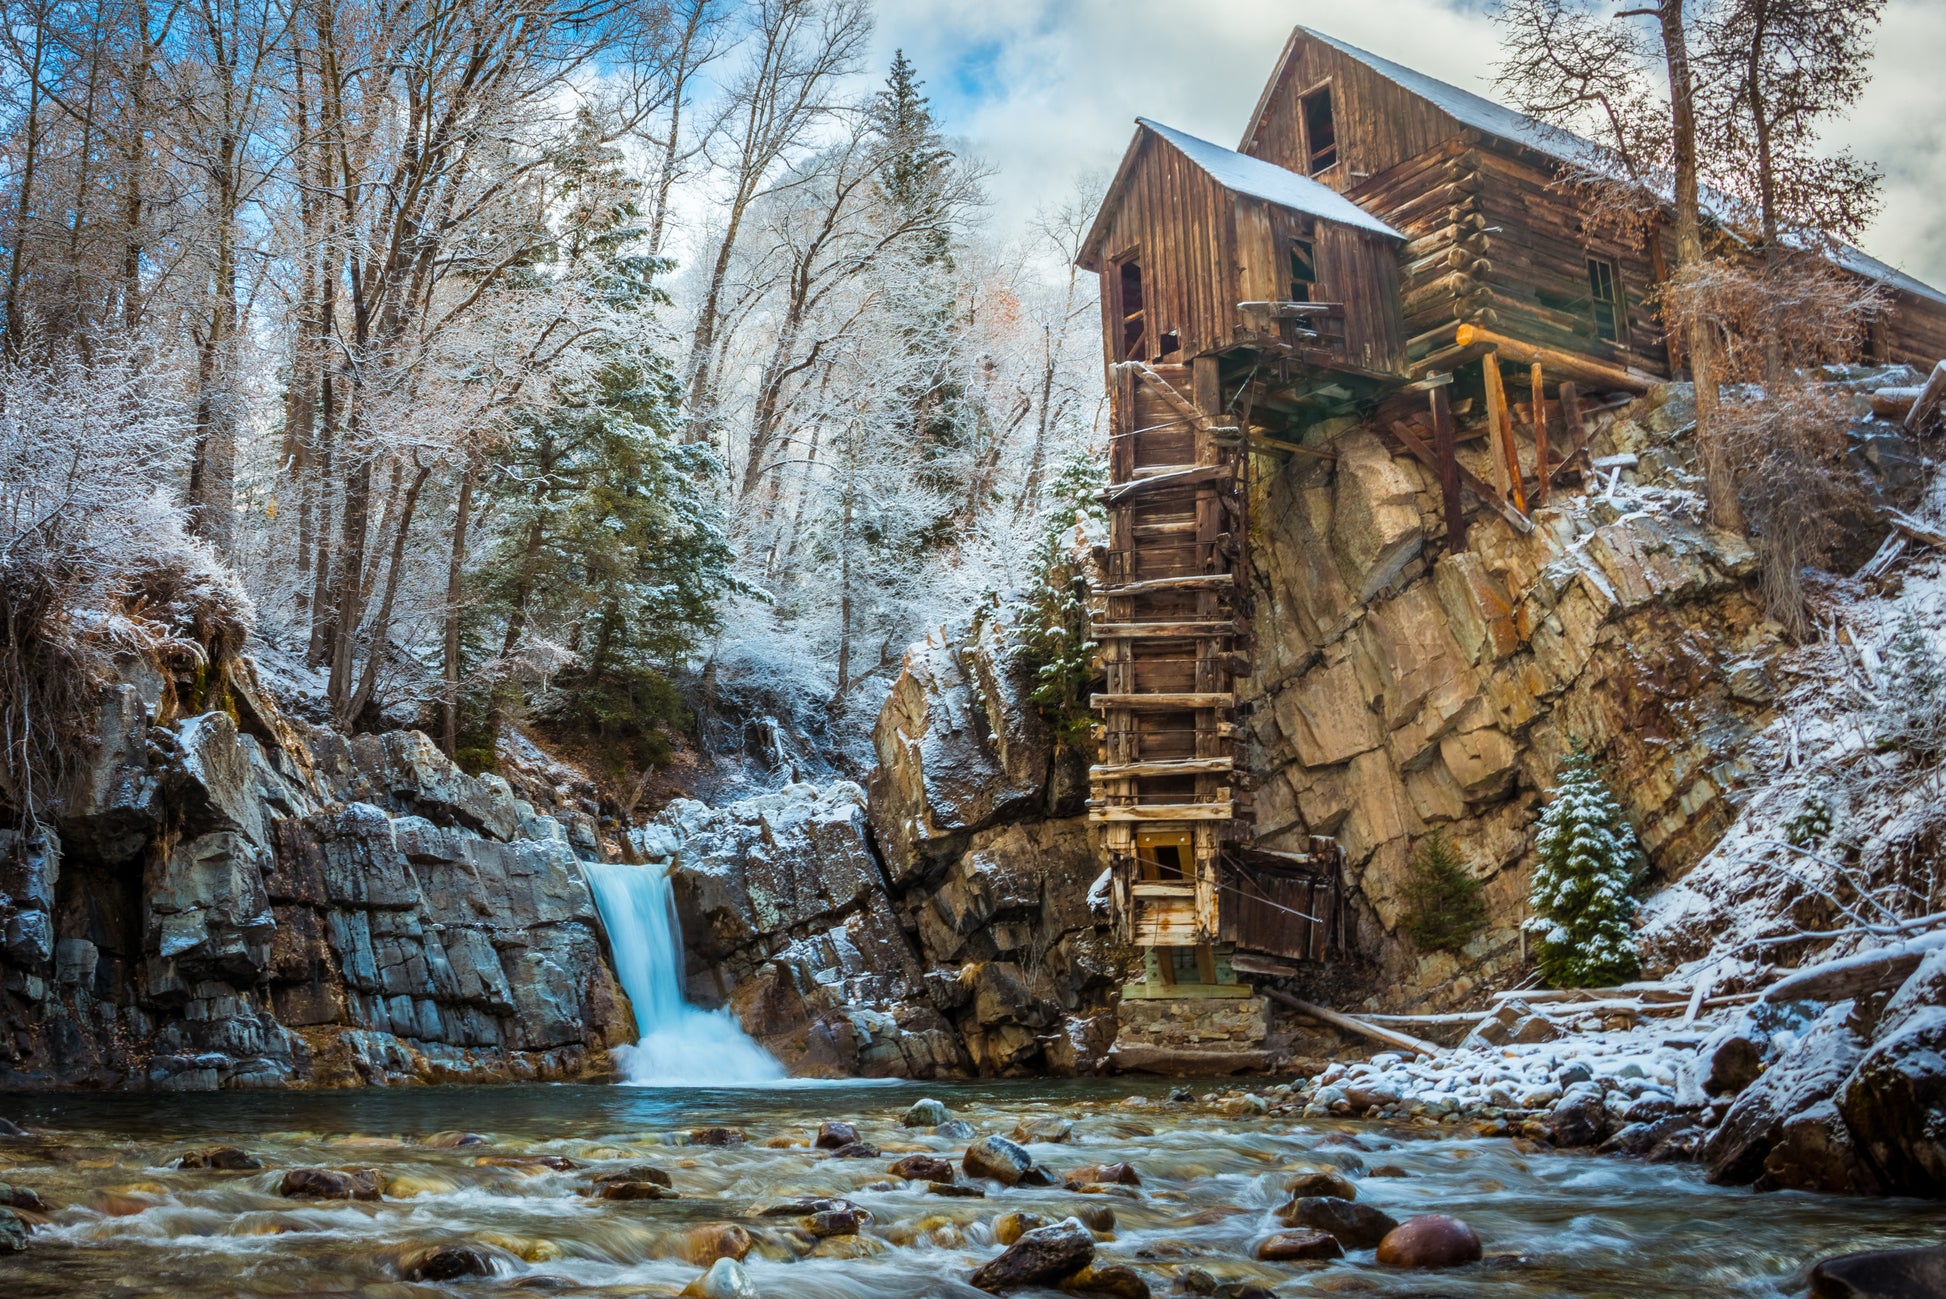 On the first snow of the season, deep in the rocky mountains, there lies a mill that once kept a community alive. The water flows clear like crystal, the mill stands like a sentinel, watching over its wild patch of the forest. 